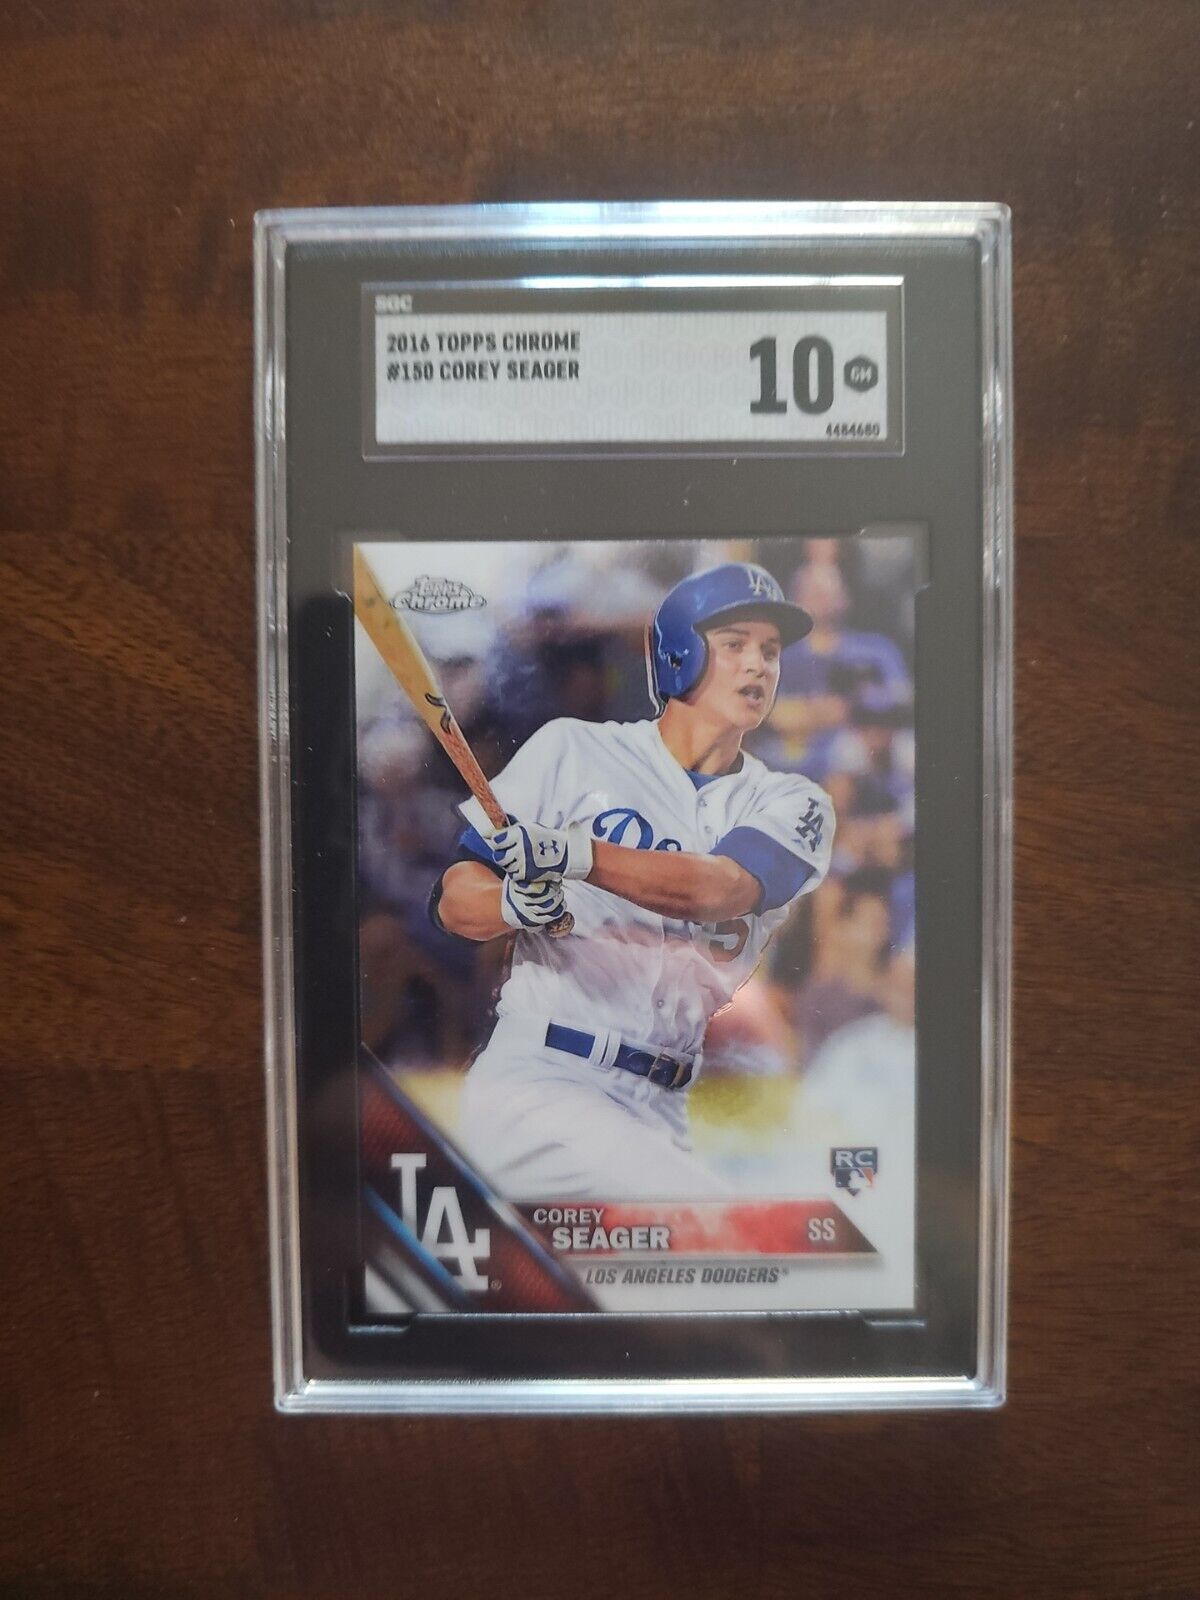 2016 Topps Chrome Corey Seager #150 SGC 10 GEM Rookie RC